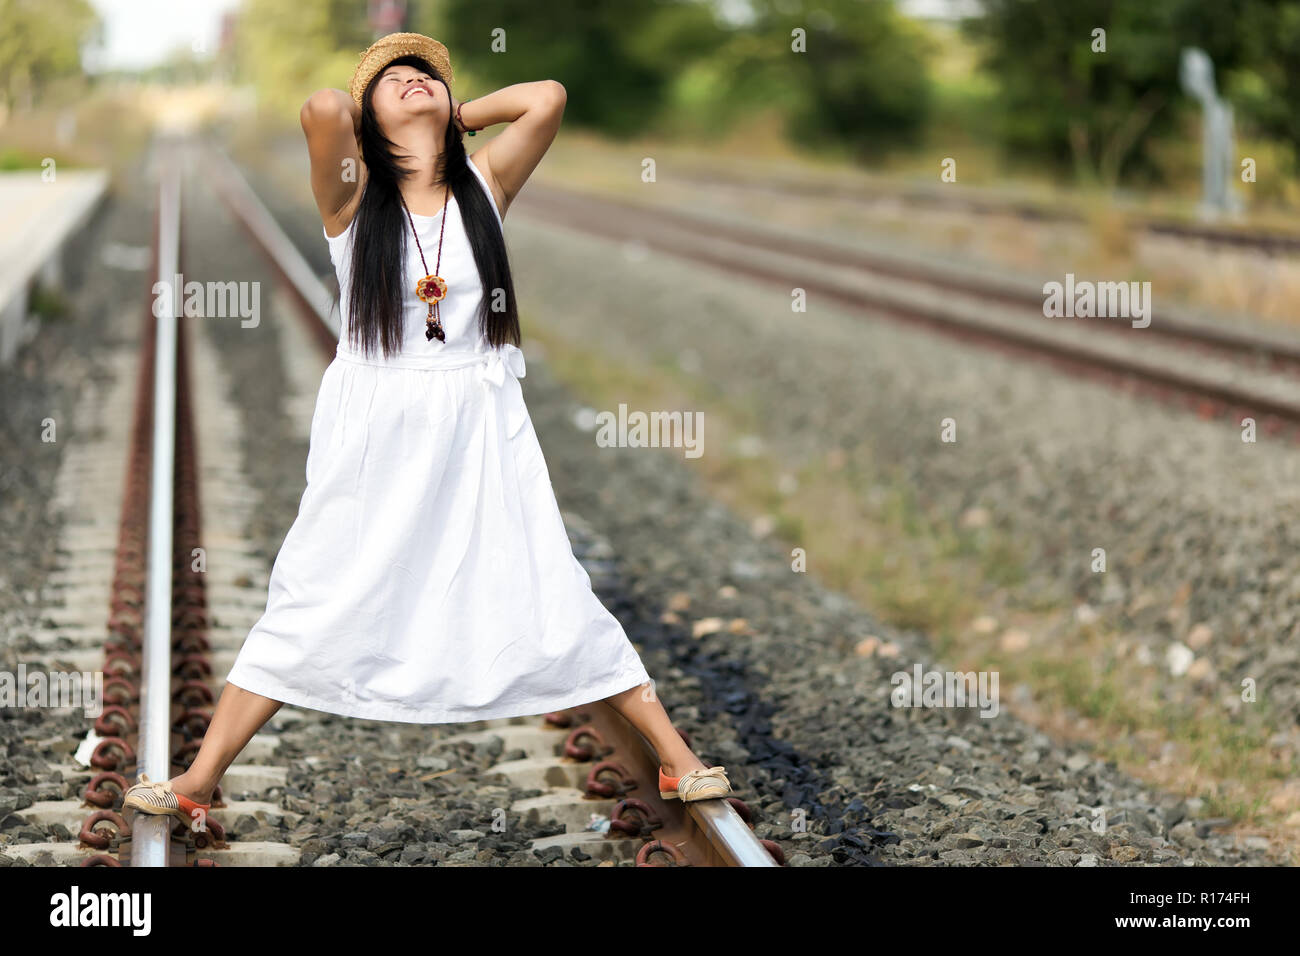 Young woman standing and relaxing on a rural railway track in a white dress on a summer evening Stock Photo